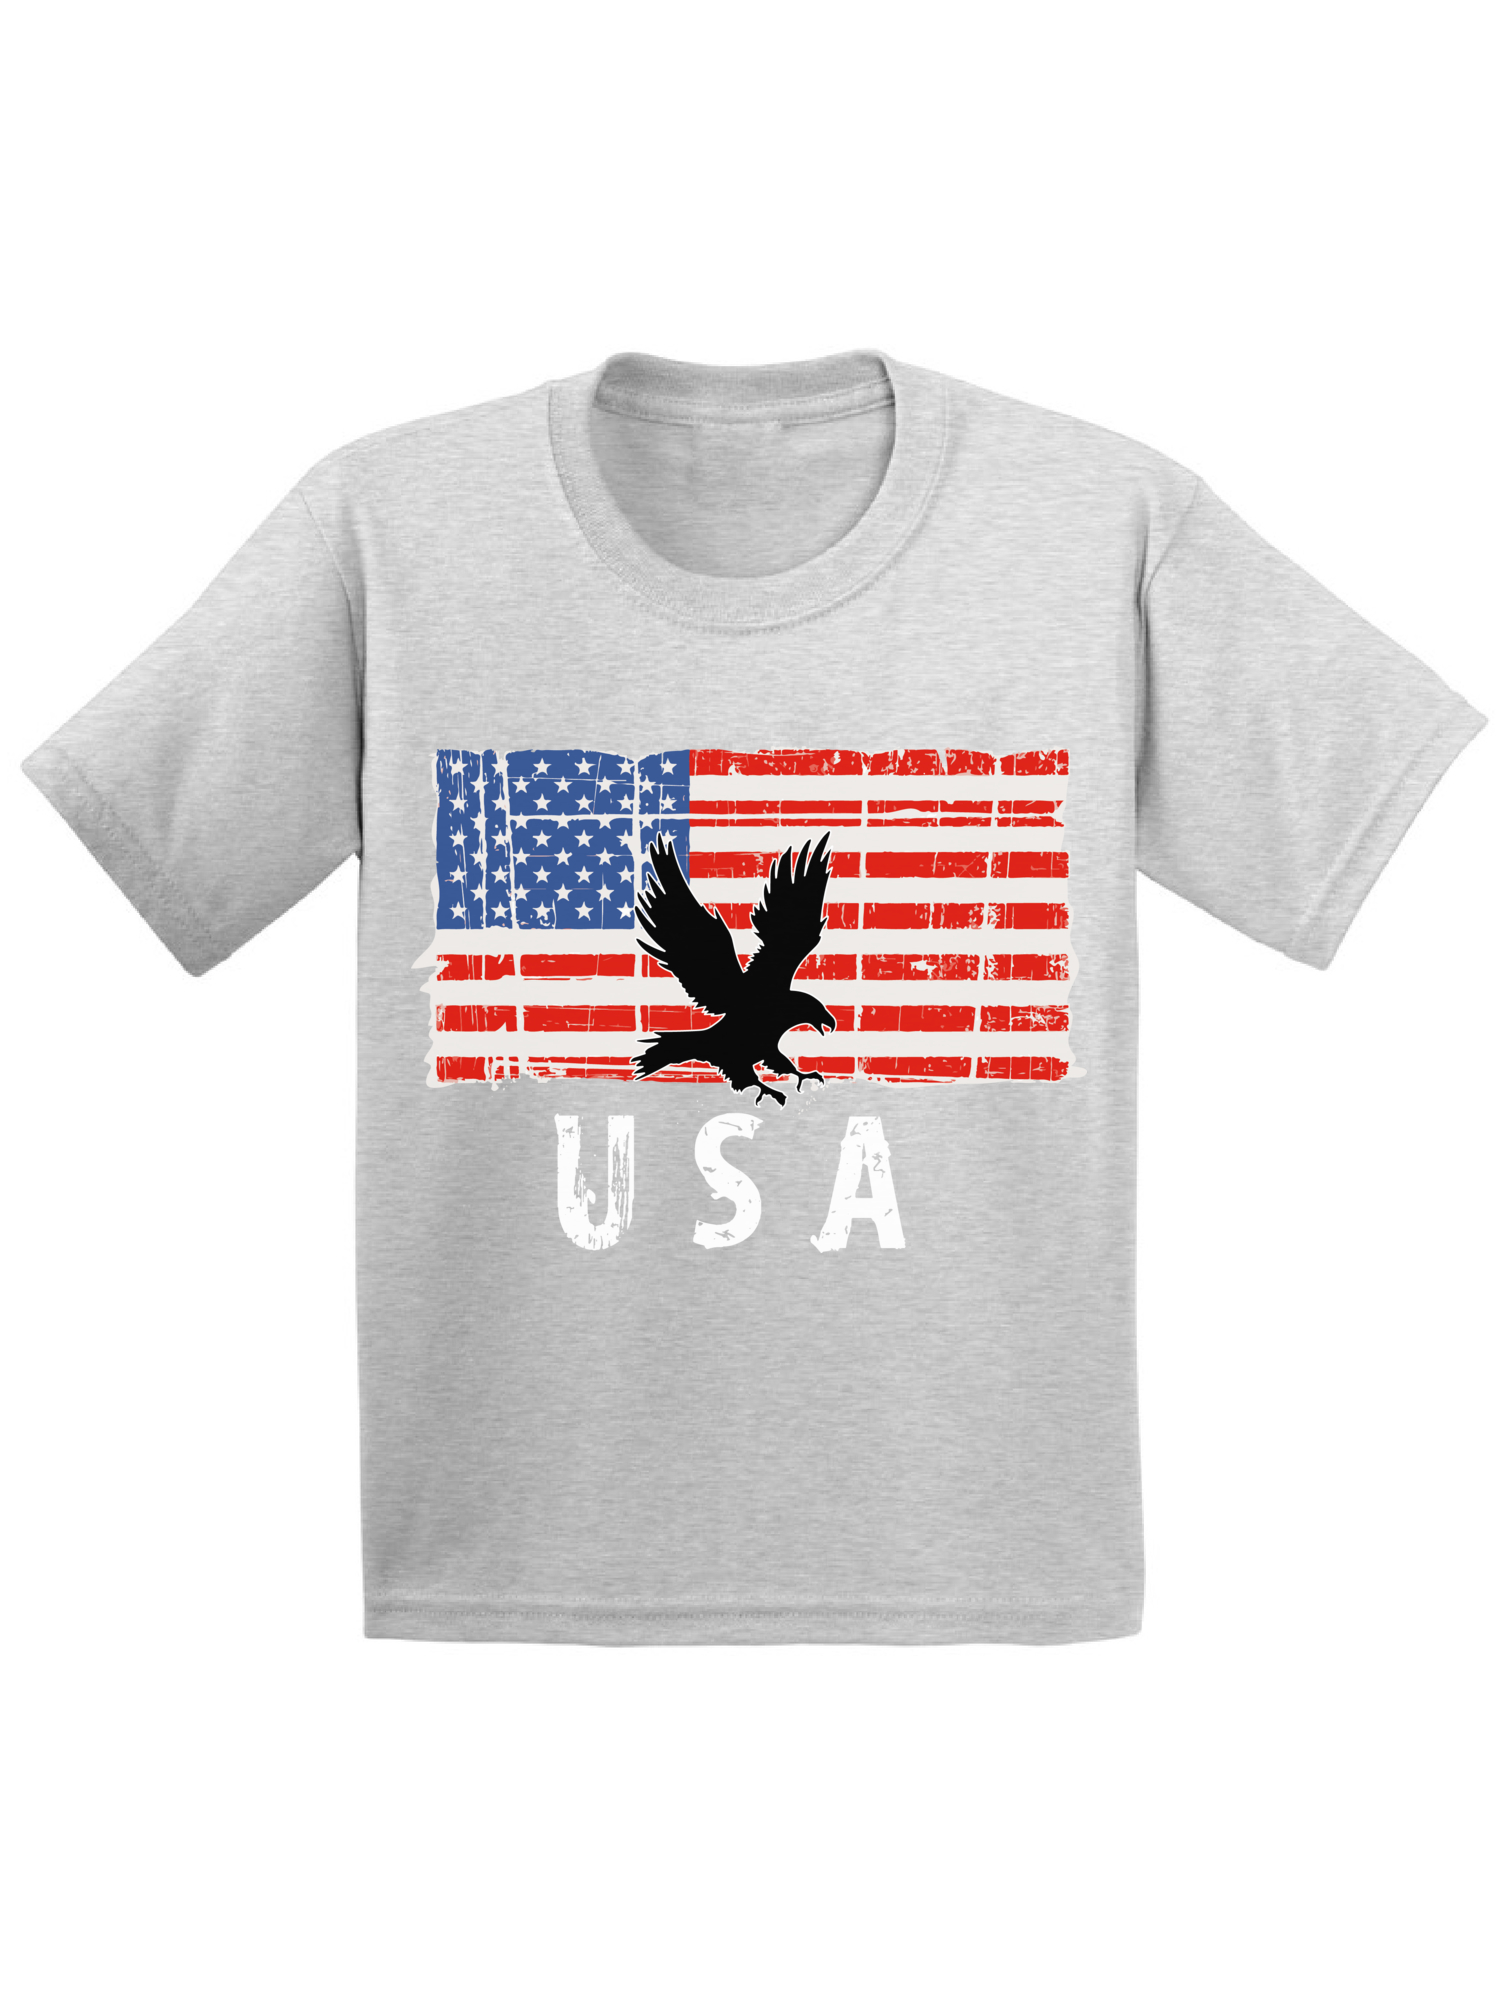 Awkward Styles Eagle USA Toddler Shirt Proud American USA Patriotic Kids T shirt USA Kids Pro America Tshirt for Boys USA Pride Pro America Tshirt for Girls Stripes and Stars 4th of July Kids T-shirt - image 1 of 4